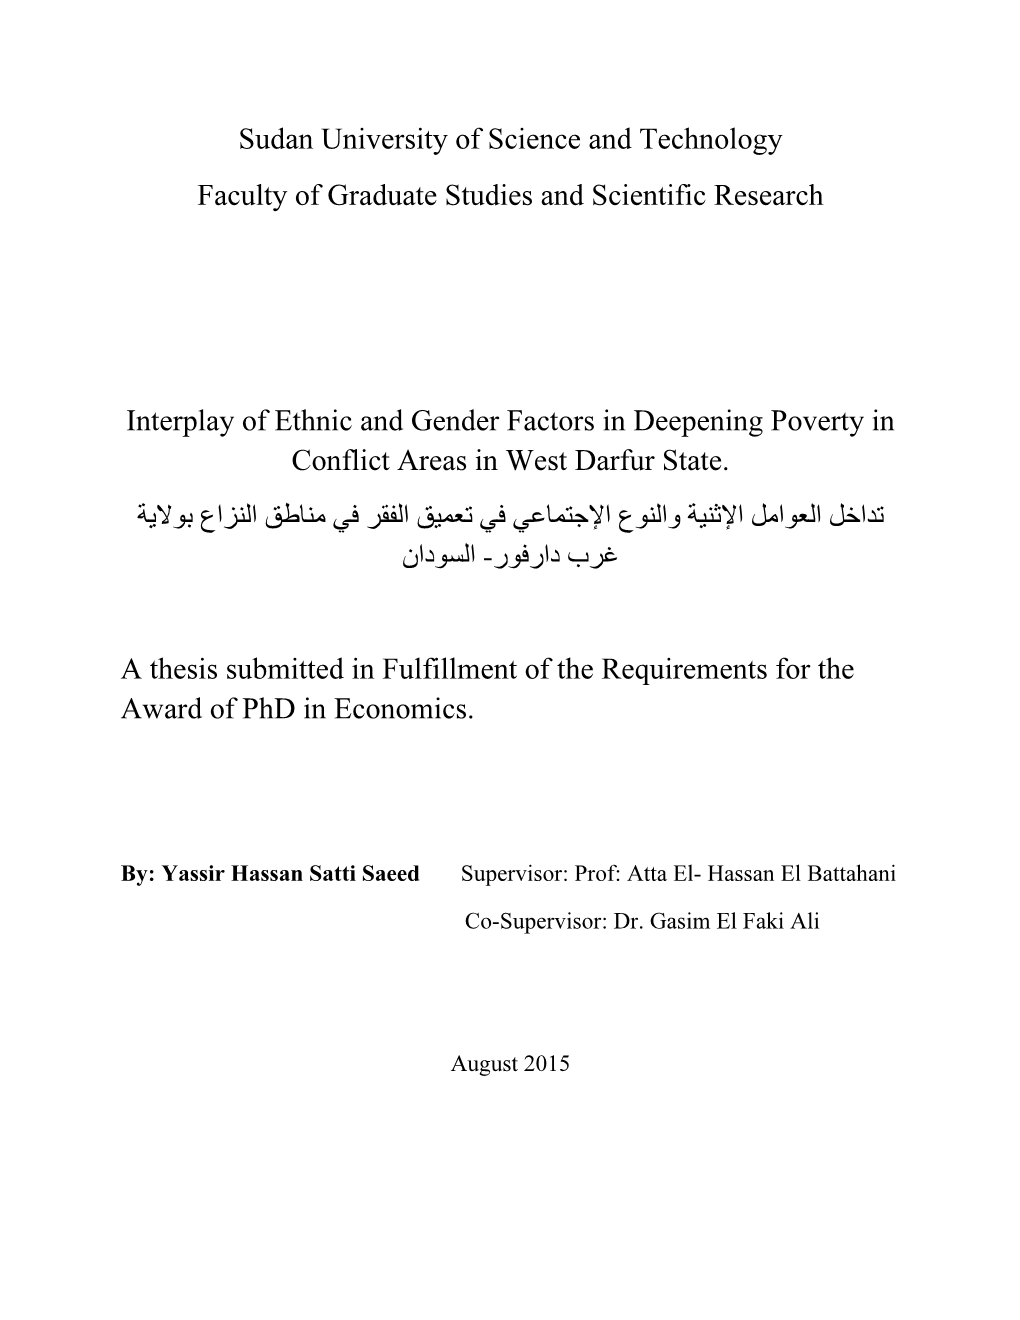 Sudan University of Science and Technology Faculty of Graduate Studies and Scientific Research